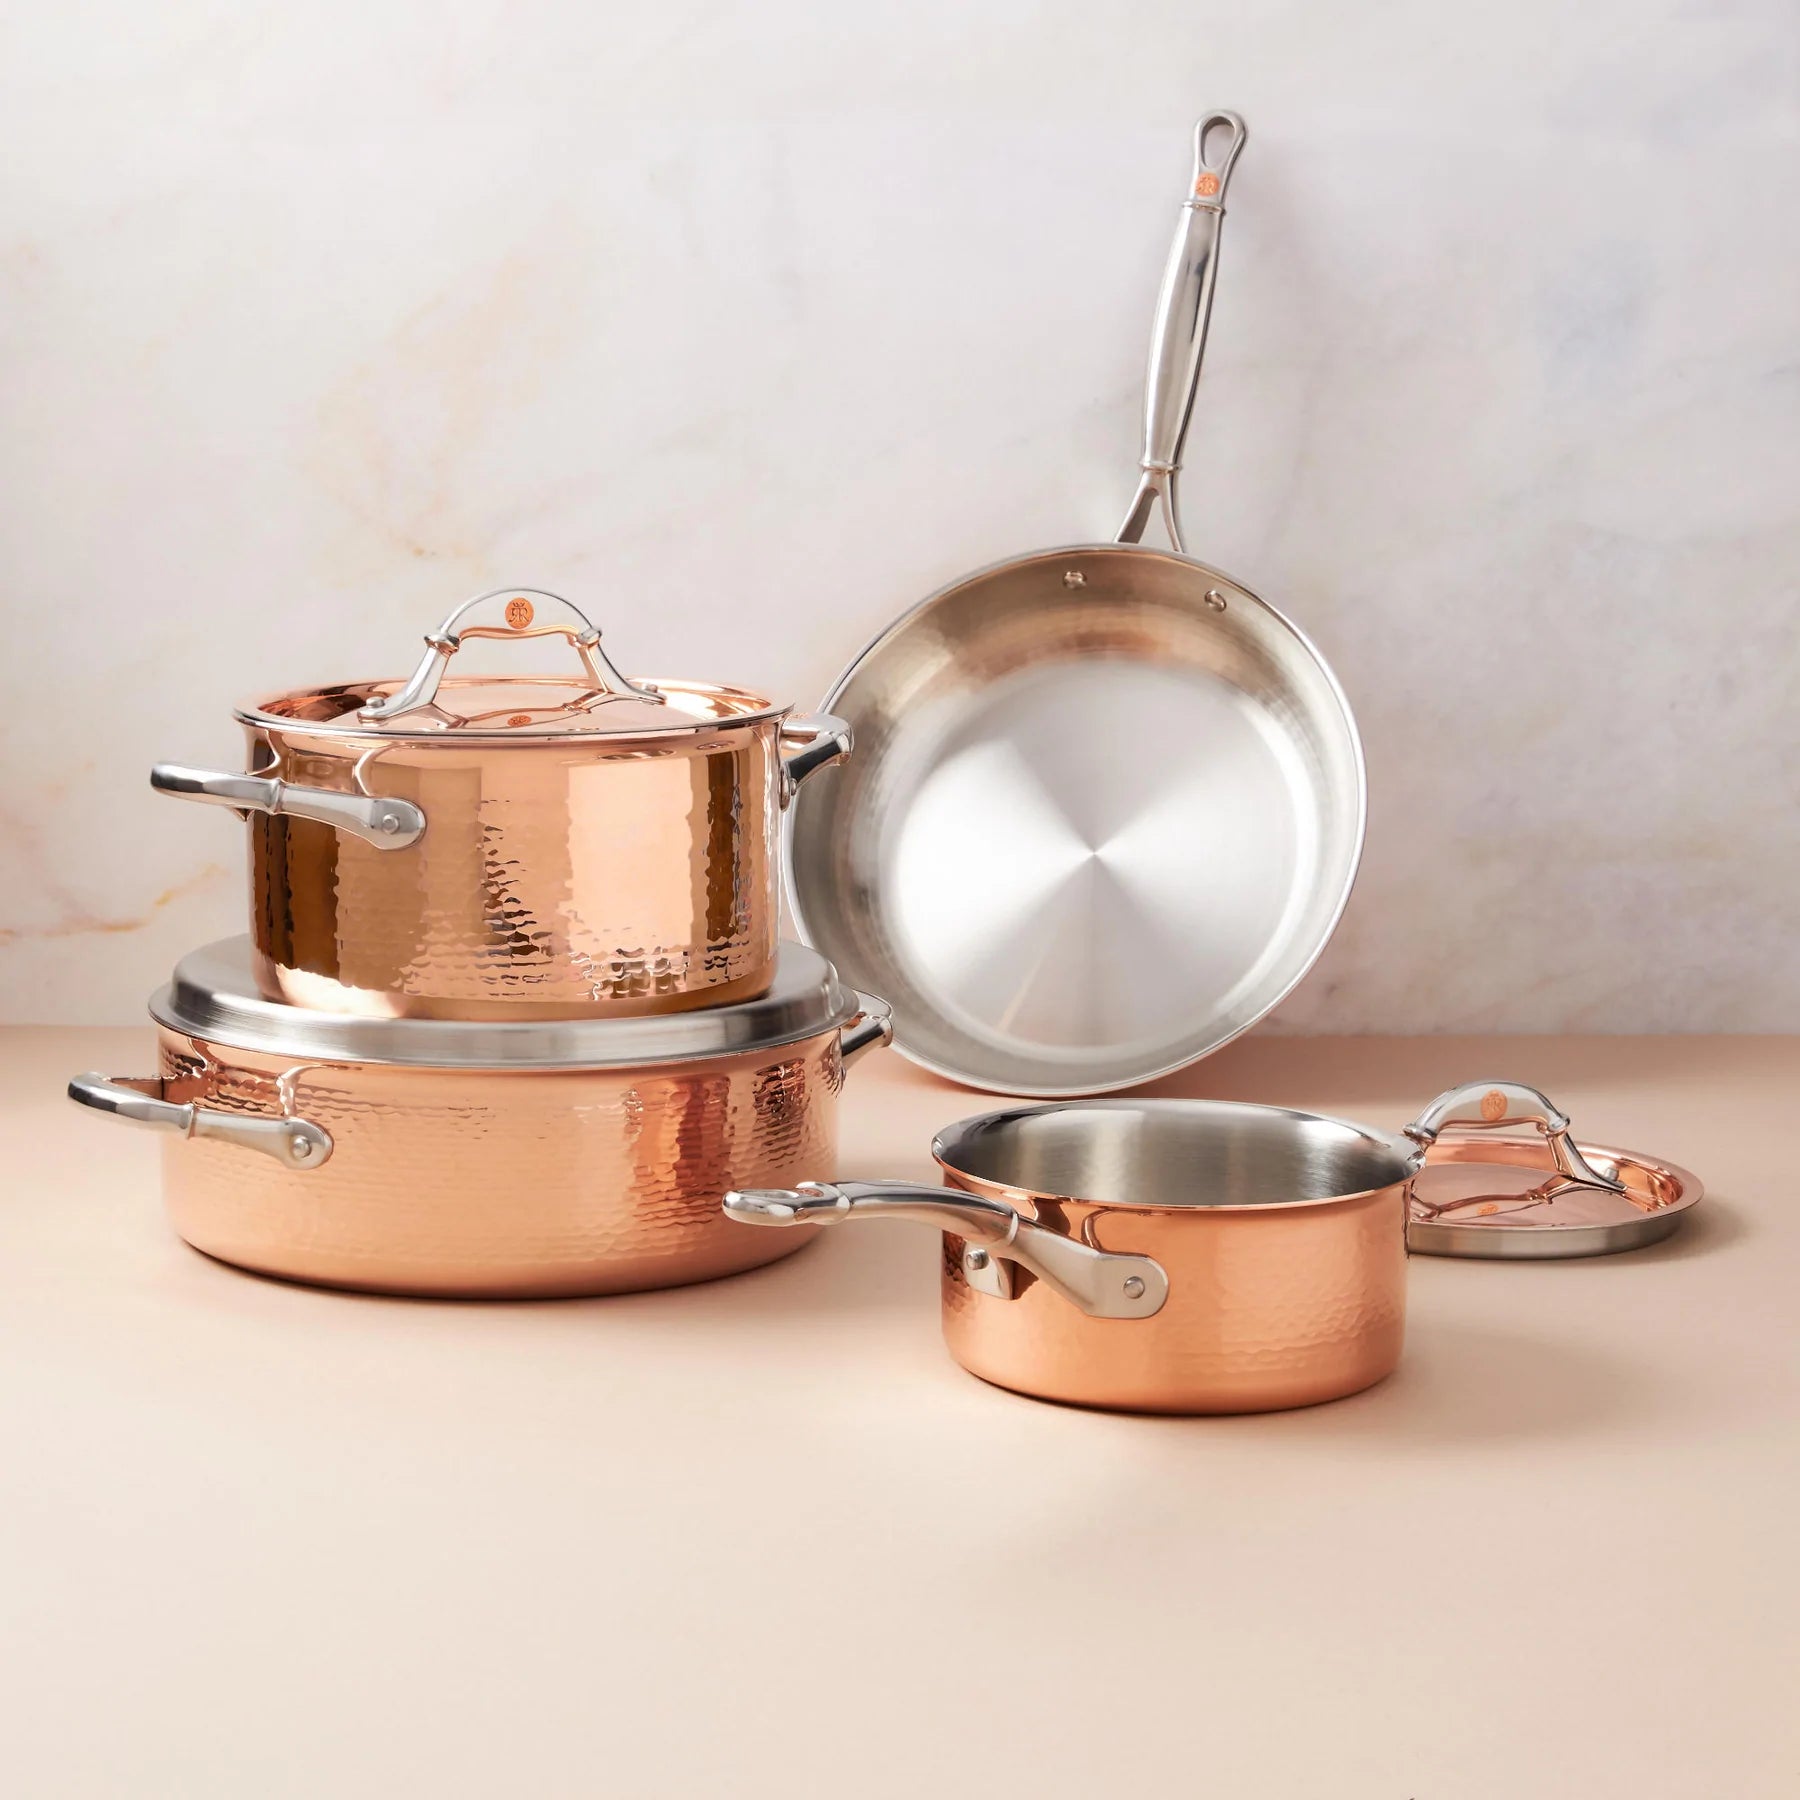 https://cdn.shopify.com/s/files/1/0580/1888/9780/files/Ruffoni-Symphoria-Cupra-7-Piece-Hammered-Copper-Cookware-Set-With-Copper-Clad-Lid-and-Riveted-Stainless-Steel-Handle-Inlaid-With-Signature-Copper-Coin.webp?v=1685838951